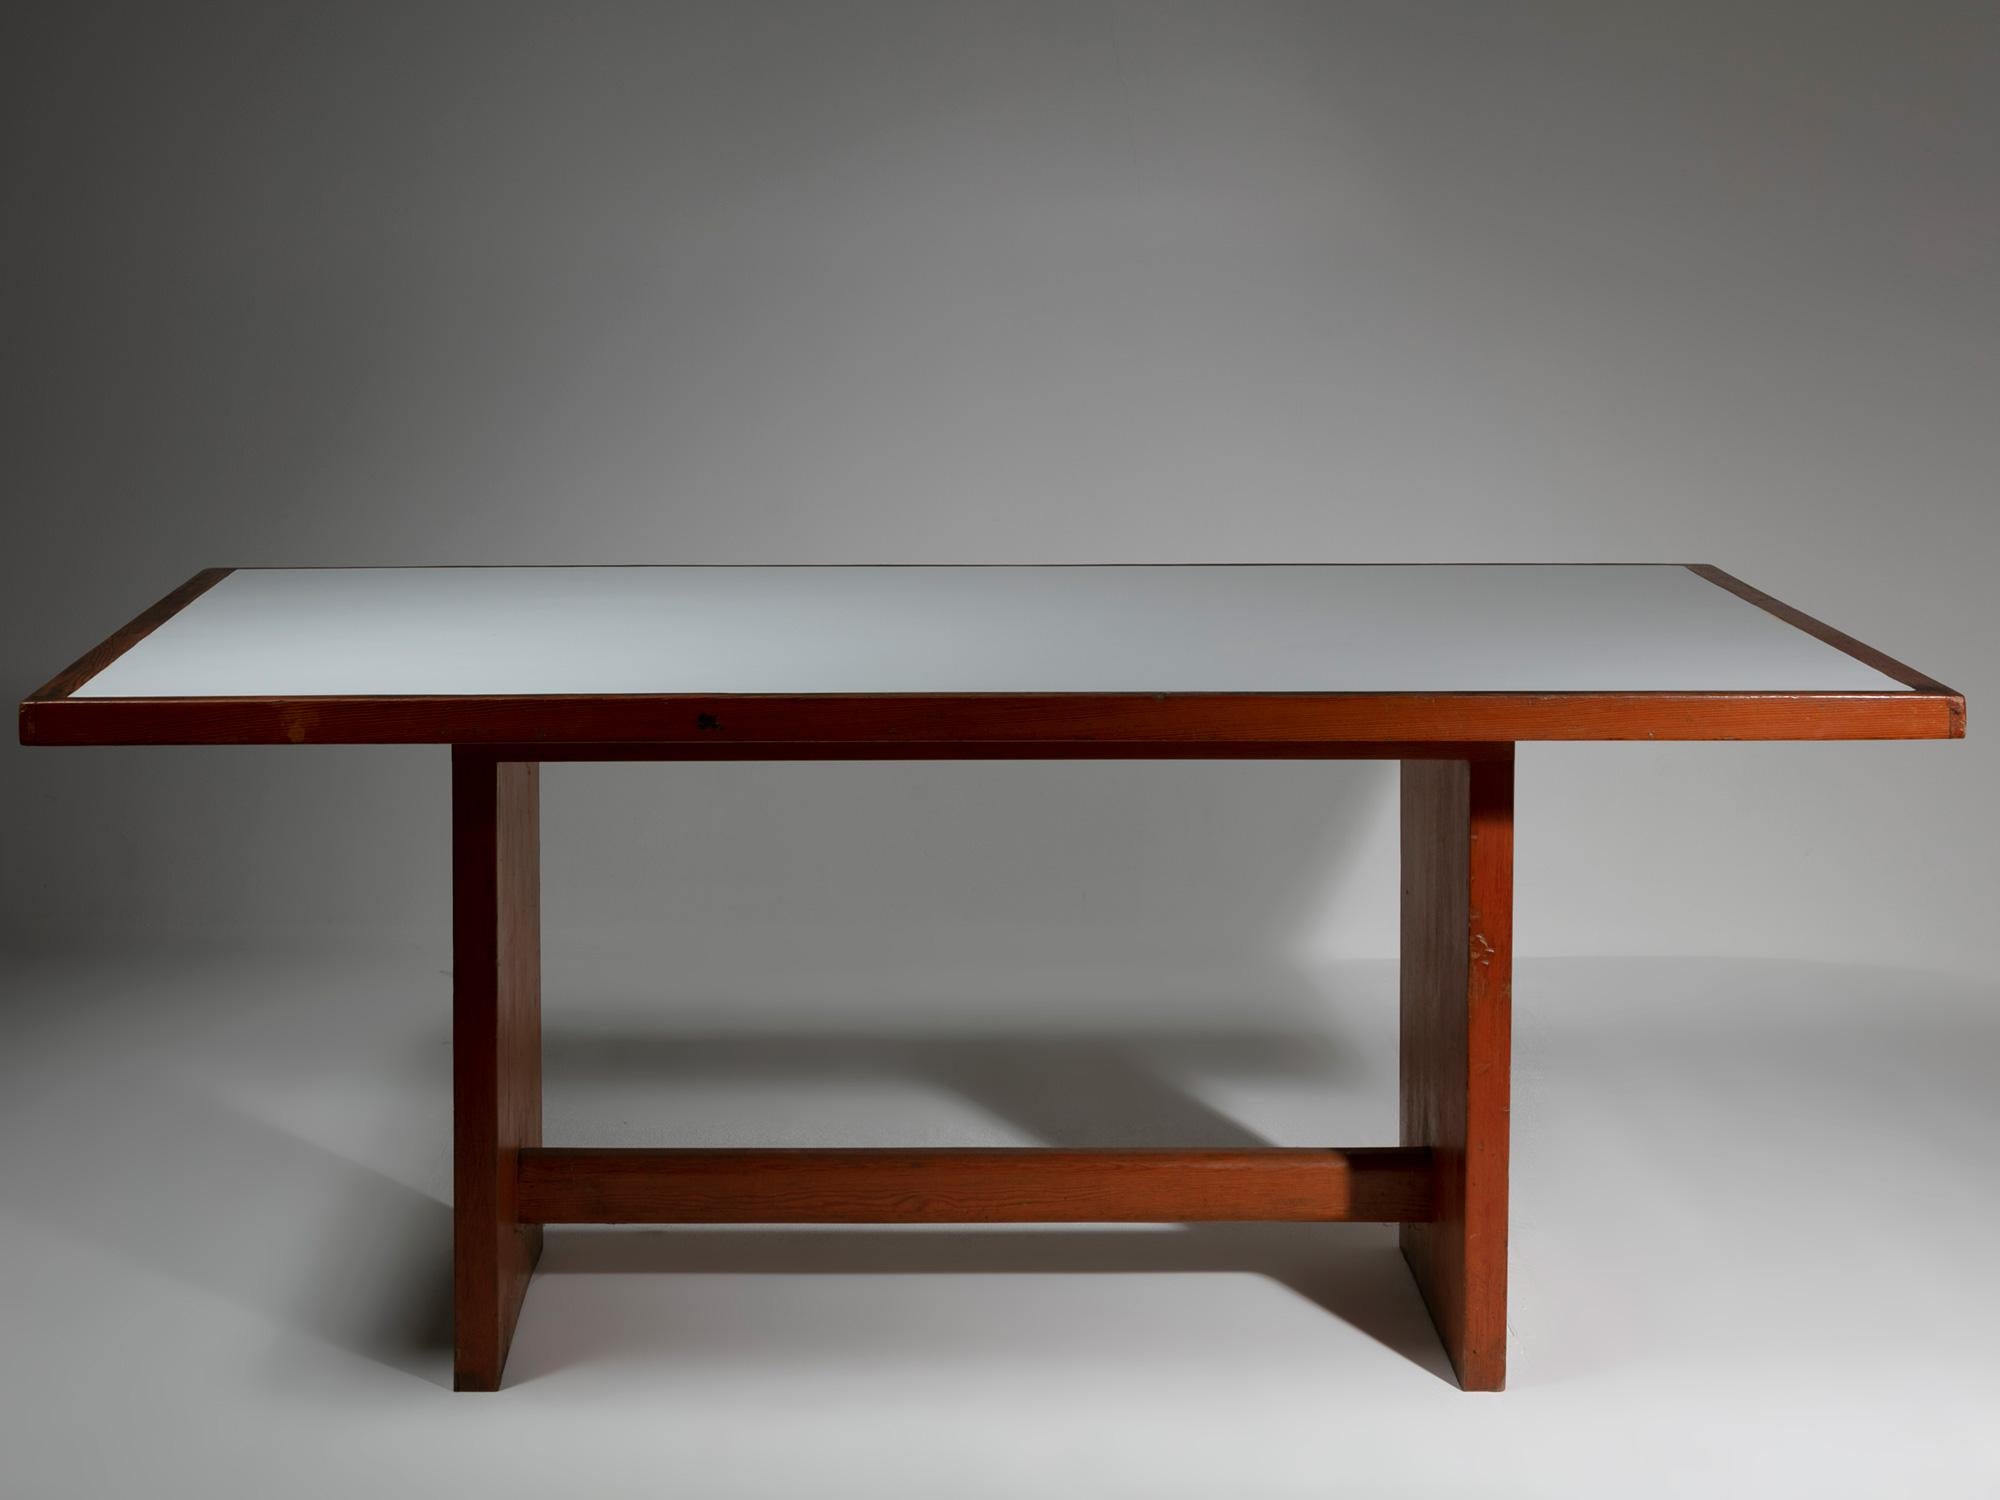 Rare custom made table by Mario Monti.
Italian late 60s rectangular table with white laminate top and wood borders.
This piece reminds Carlo Scarpa works with straight lines and beautiful constructions.